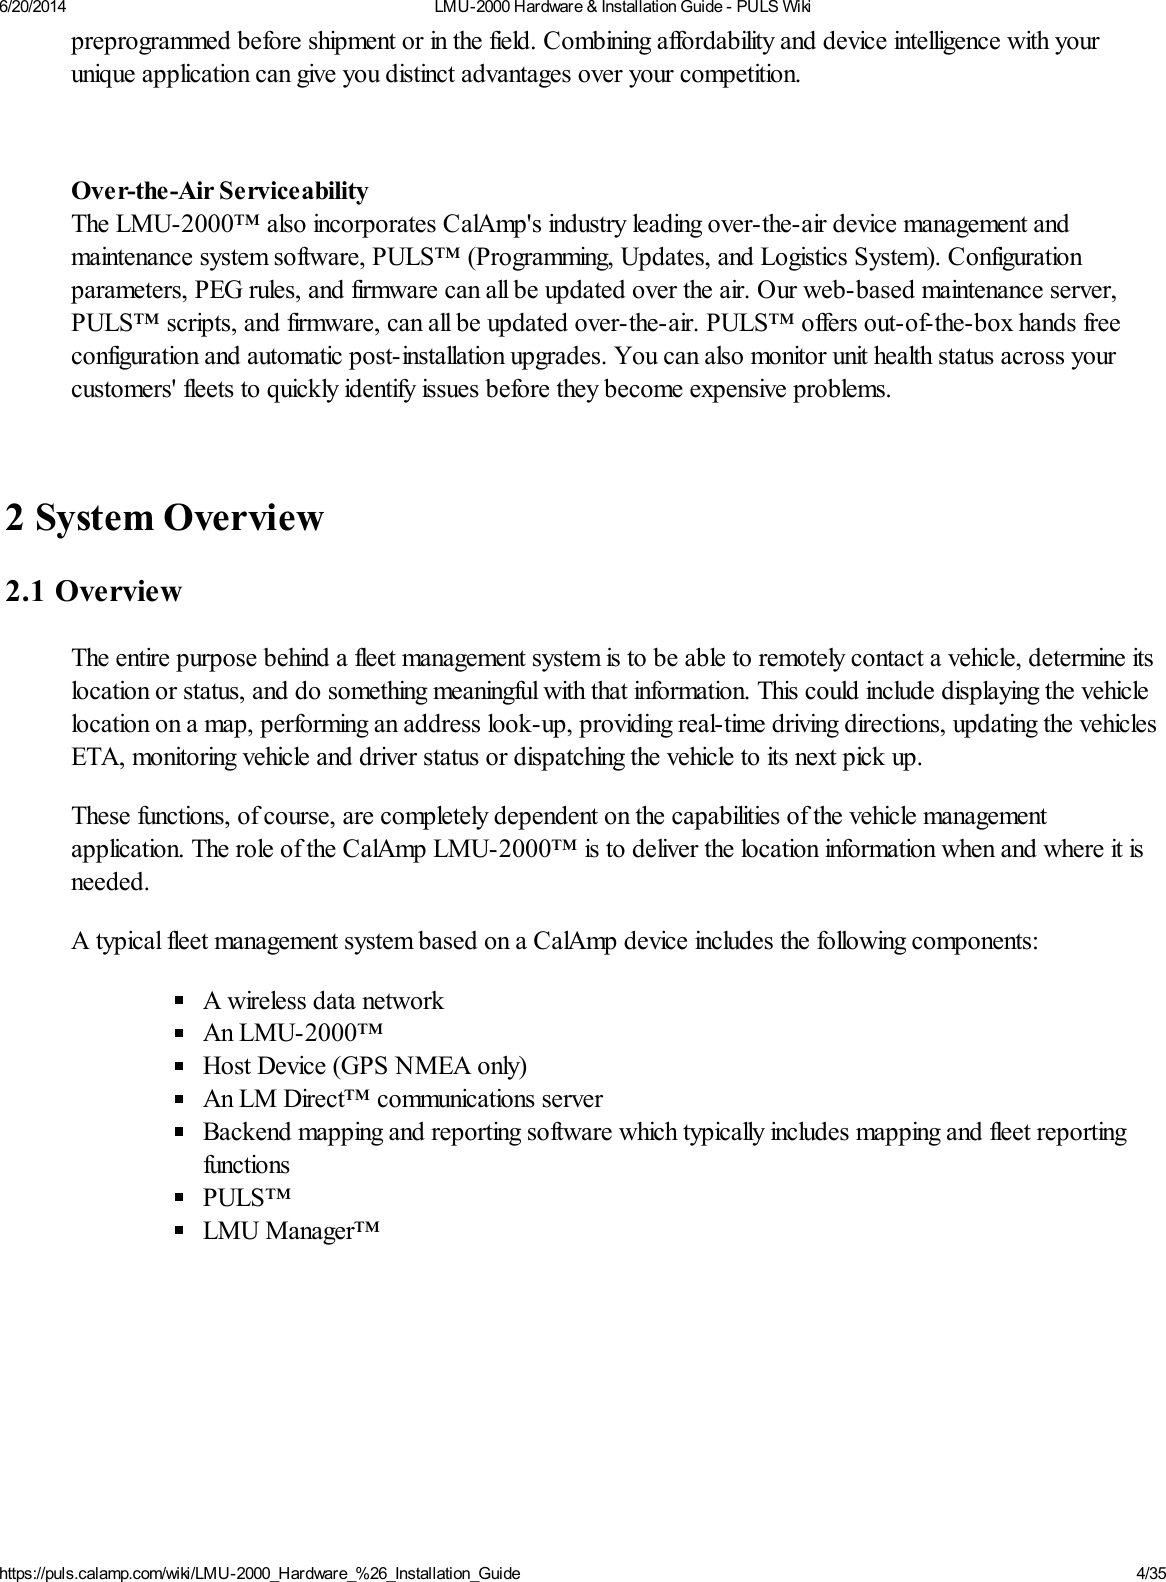 6/20/2014 LMU-2000 Hardware &amp; Installation Guide - PULS Wikihttps://puls.calamp.com/wiki/LMU-2000_Hardware_%26_Installation_Guide 4/35preprogrammed before shipment or in the field. Combining affordability and device intelligence with yourunique application can give you distinct advantages over your competition.Over-the-Air ServiceabilityThe LMU-2000™ also incorporates CalAmp&apos;s industry leading over-the-air device management andmaintenance system software, PULS™ (Programming, Updates, and Logistics System). Configurationparameters, PEG rules, and firmware can all be updated over the air. Our web-based maintenance server,PULS™ scripts, and firmware, can all be updated over-the-air. PULS™ offers out-of-the-box hands freeconfiguration and automatic post-installation upgrades. You can also monitor unit health status across yourcustomers&apos; fleets to quickly identify issues before they become expensive problems.2 System Overview2.1 OverviewThe entire purpose behind a fleet management system is to be able to remotely contact a vehicle, determine itslocation or status, and do something meaningful with that information. This could include displaying the vehiclelocation on a map, performing an address look-up, providing real-time driving directions, updating the vehiclesETA, monitoring vehicle and driver status or dispatching the vehicle to its next pick up.These functions, of course, are completely dependent on the capabilities of the vehicle managementapplication. The role of the CalAmp LMU-2000™ is to deliver the location information when and where it isneeded.A typical fleet management system based on a CalAmp device includes the following components:A wireless data networkAn LMU-2000™Host Device (GPS NMEA only)An LM Direct™ communications serverBackend mapping and reporting software which typically includes mapping and fleet reportingfunctionsPULS™LMU Manager™